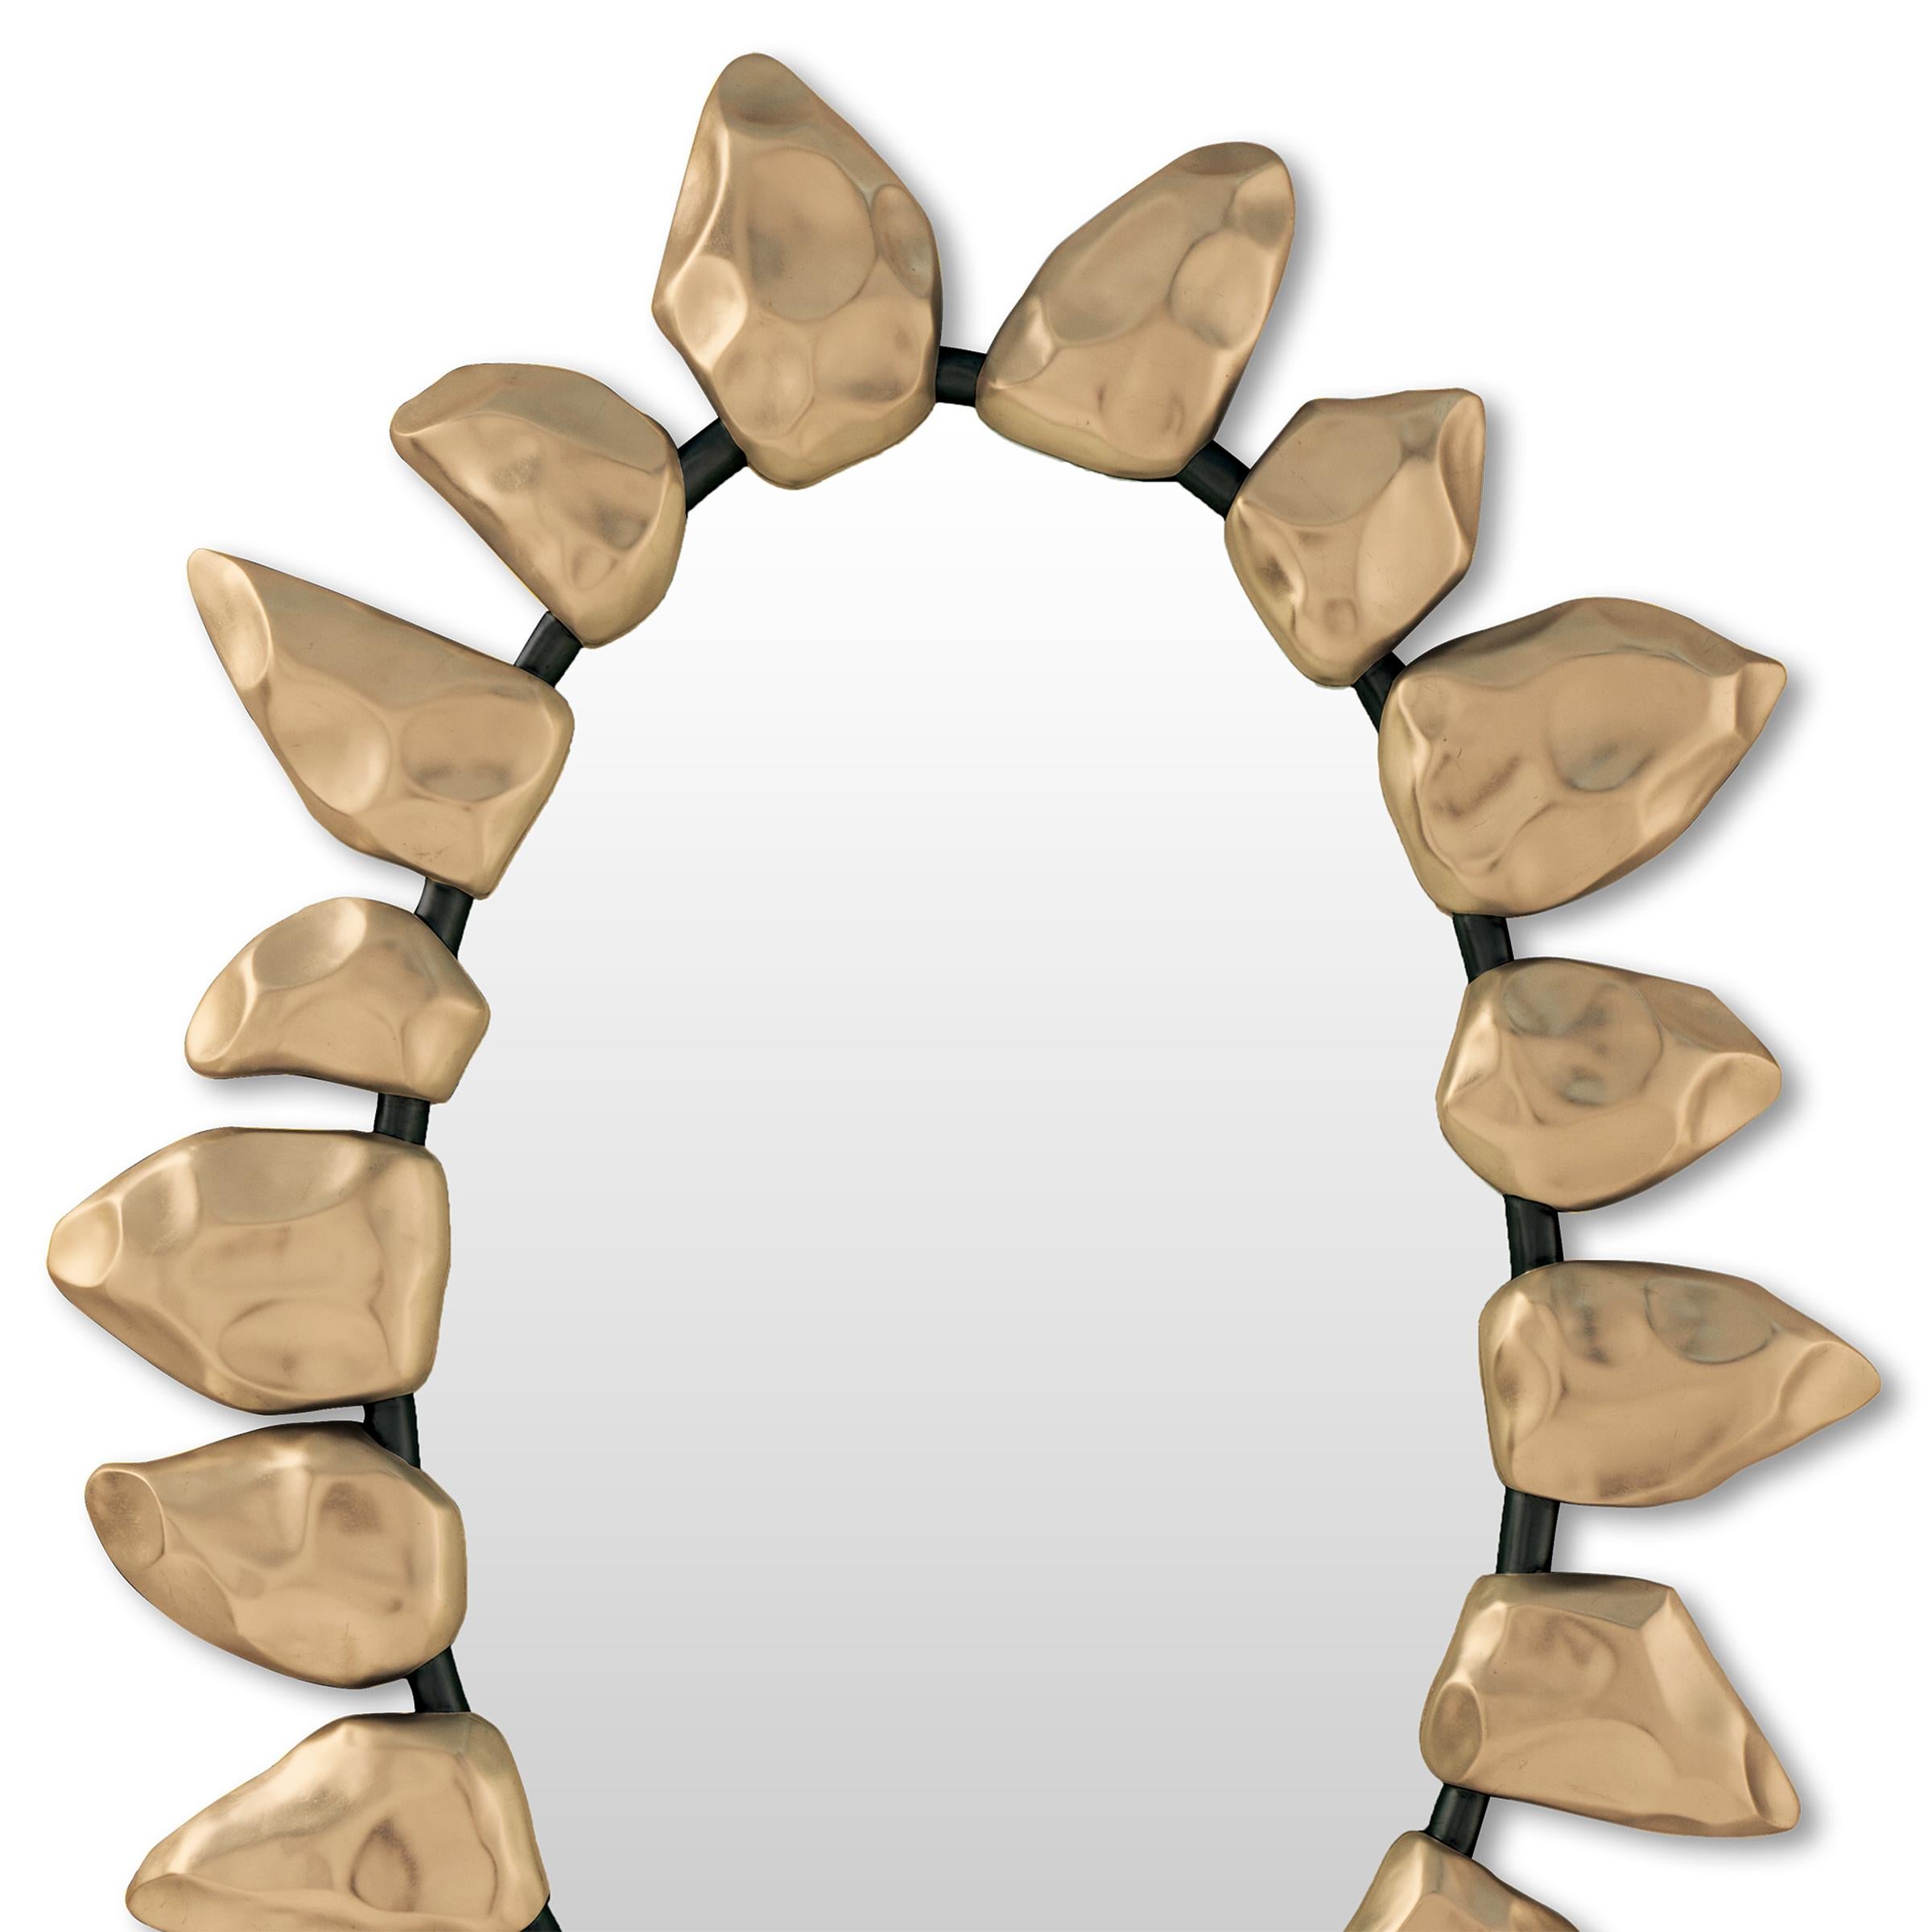 Mirror Golden Silex with hand-carved solid
mahogany wood, like shark teeth with gold
leaf paint. With mirror glass circled by a black 
satin frame.
Also available with teeth in white satin and circled 
frame in moon dust finish. Or with teeth in